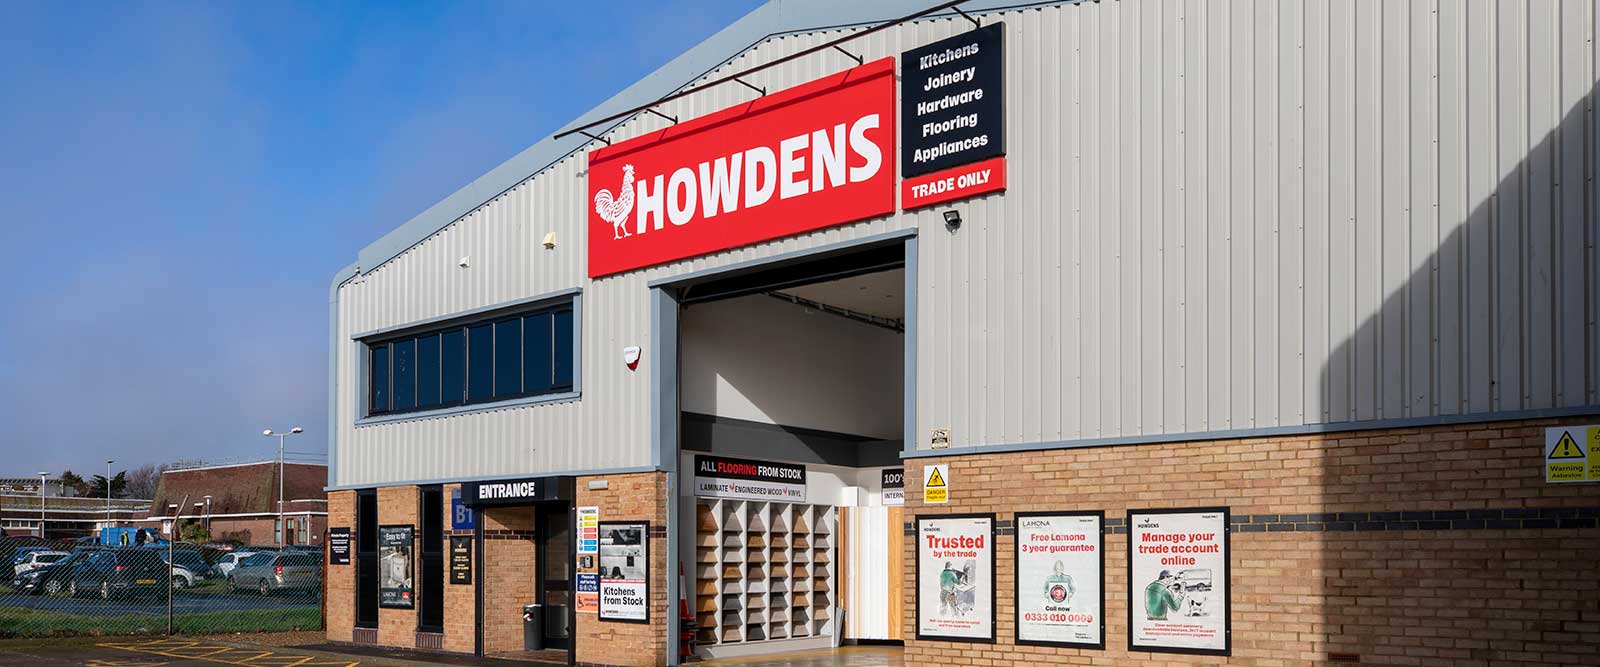 Howden Joinery Group